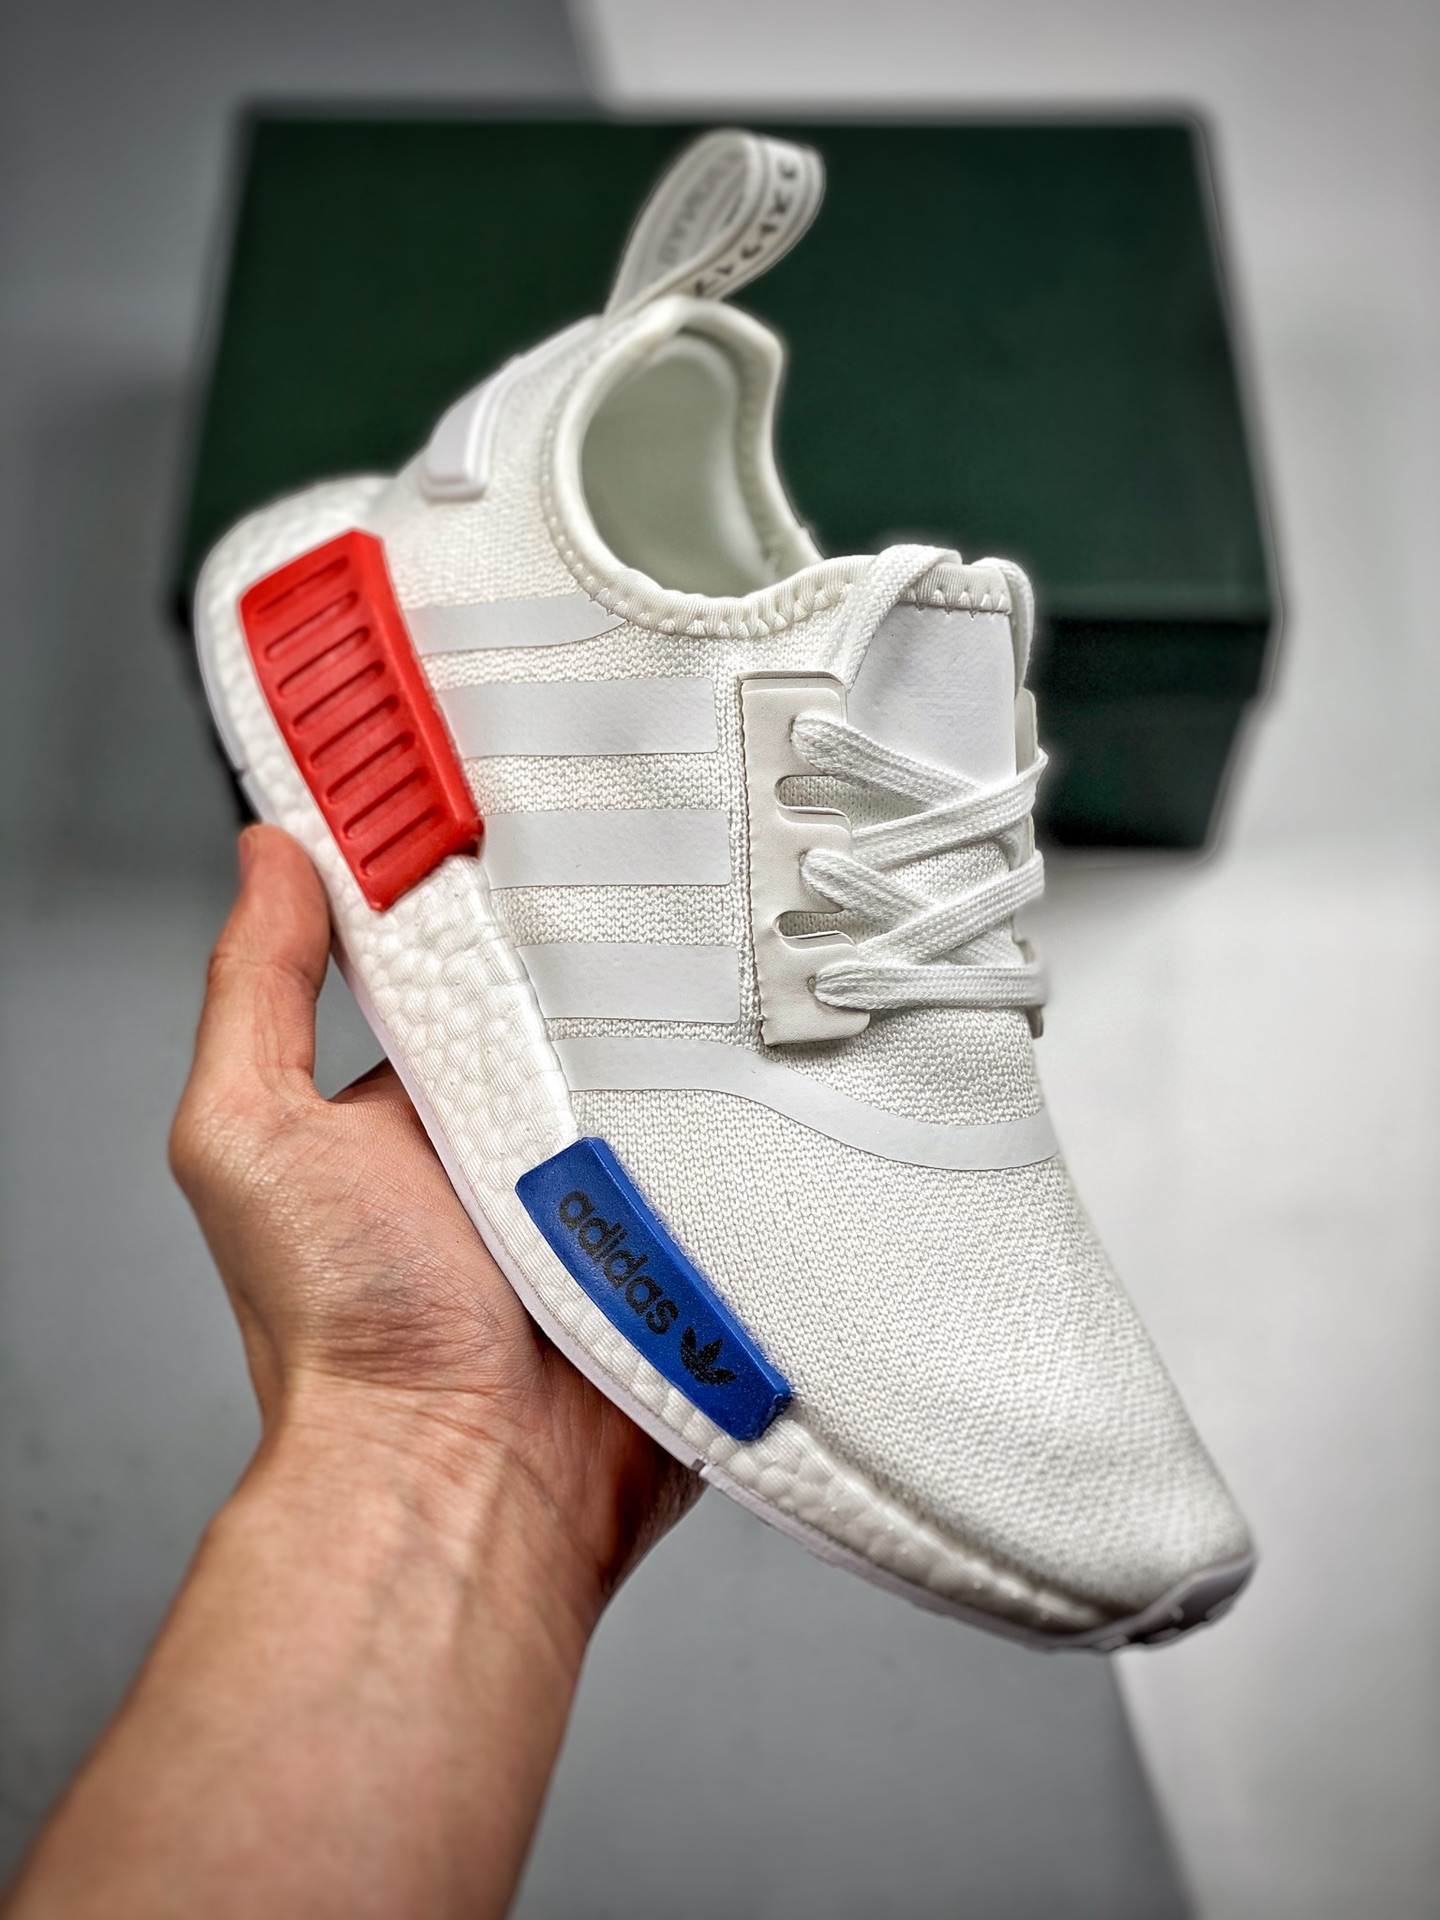 adidas NMD R1 Cloud White GZ7925 For Sale – Sneaker Hello